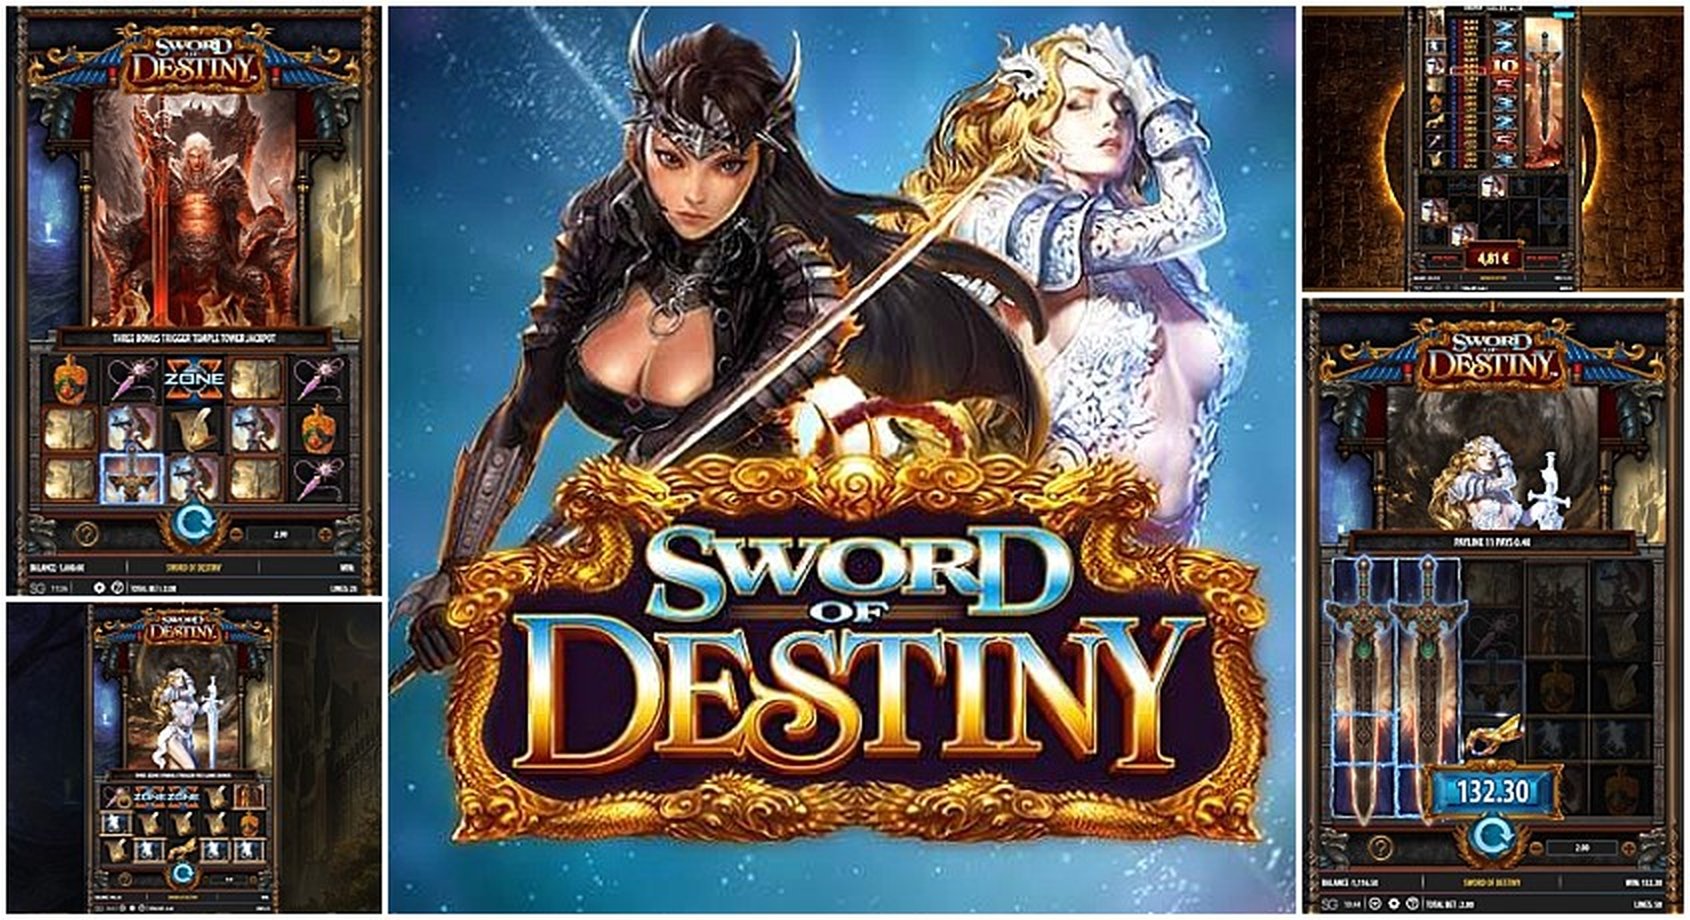 The Sword of Destiny Online Slot Demo Game by Bally Technologies